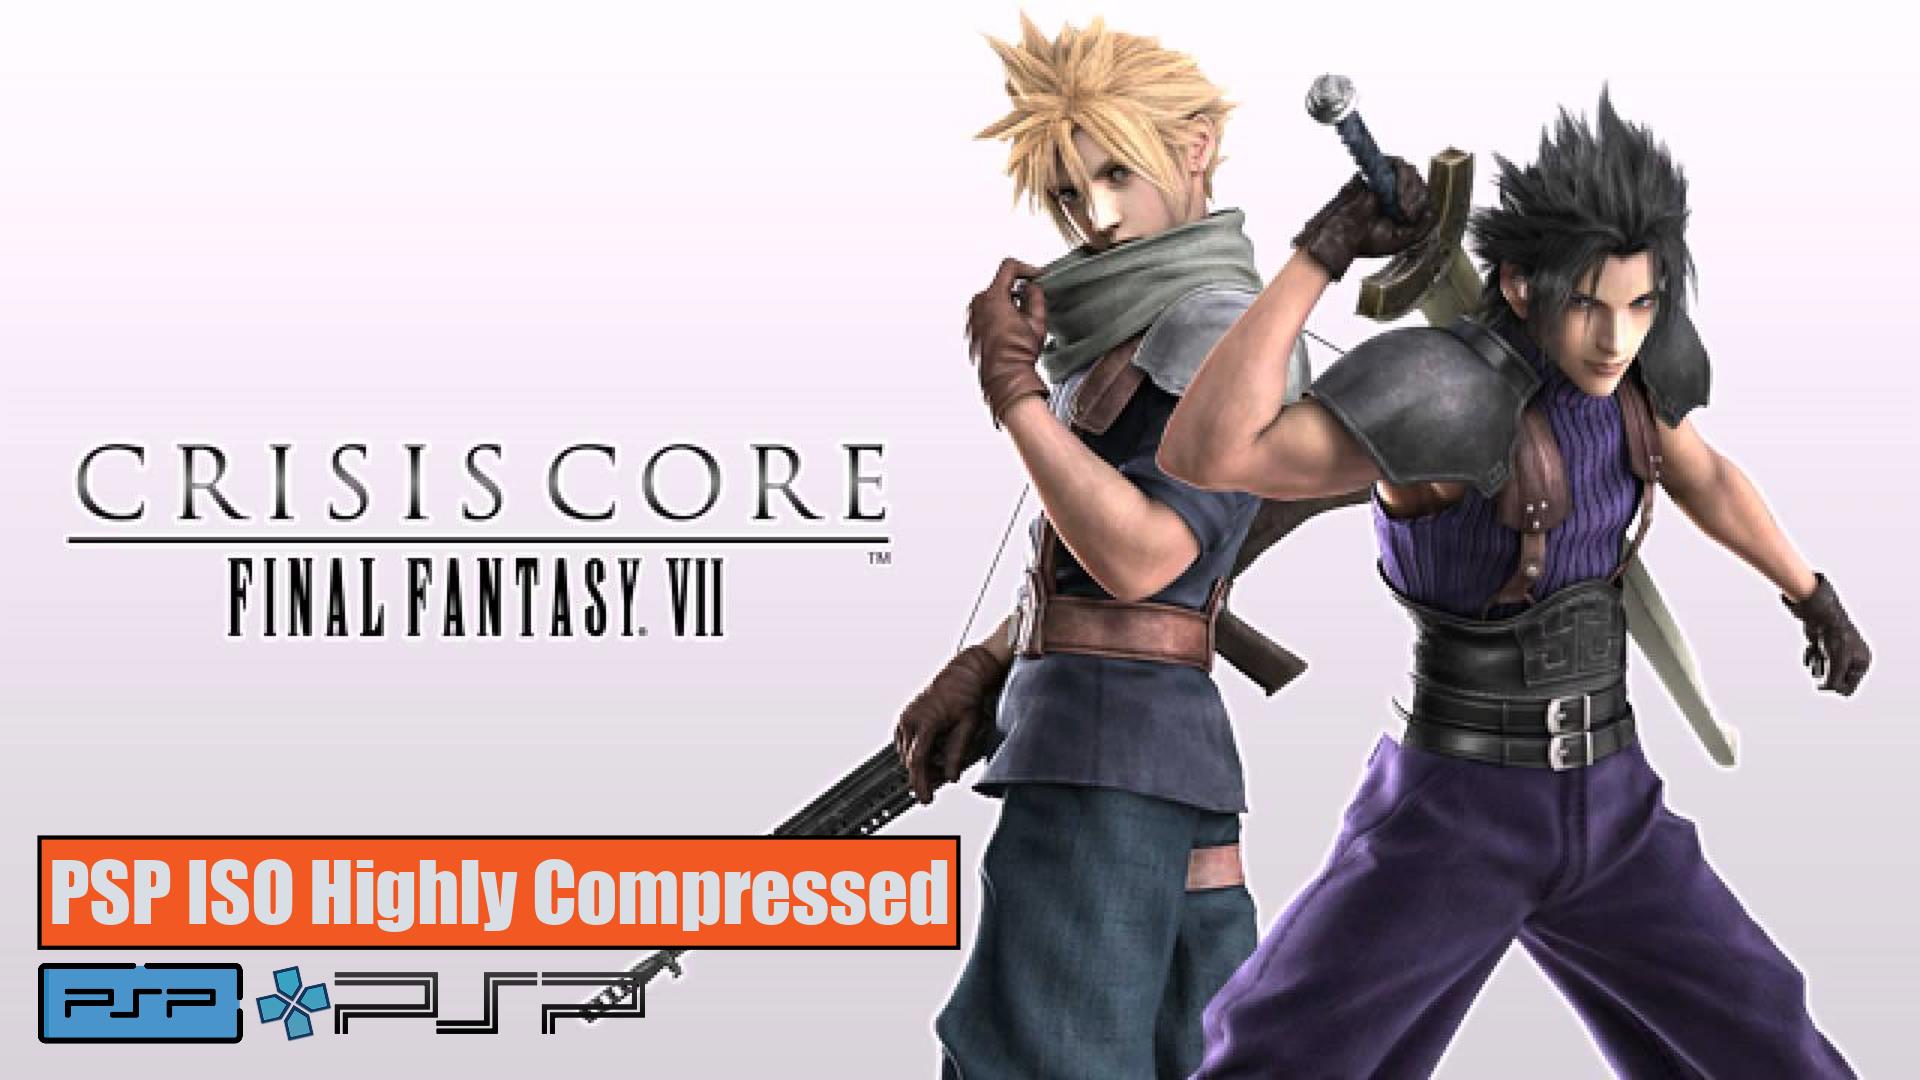 Crisis Core Final Fantasy VII PSP ISO Highly Compressed.